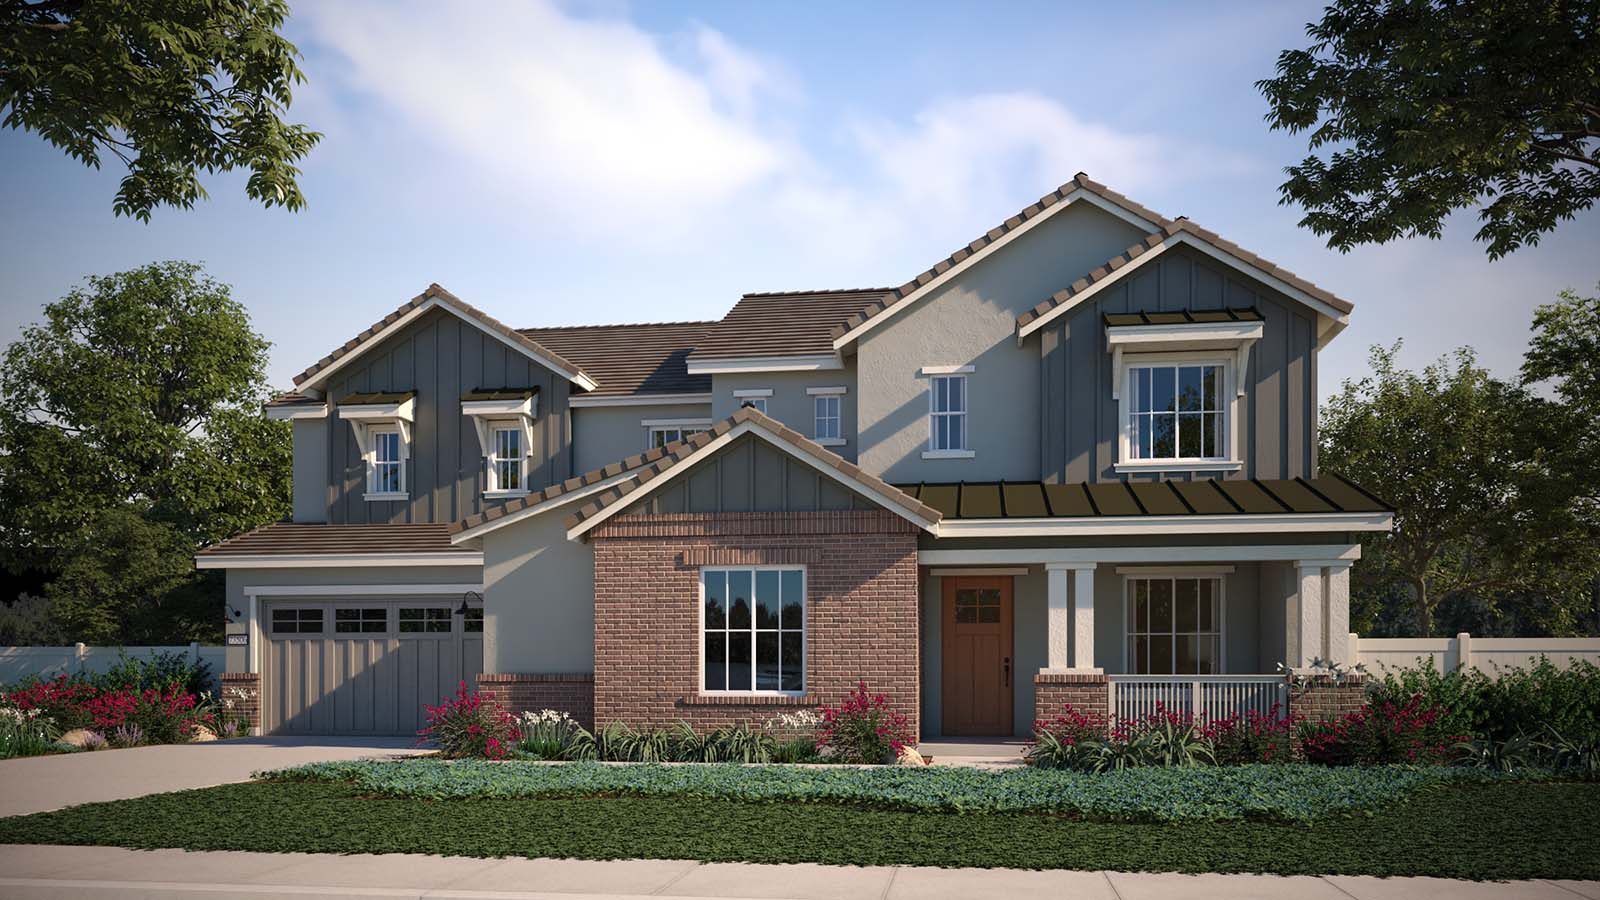 Exterior Elevation C - Plan Three - Acacia at Sommers Bend